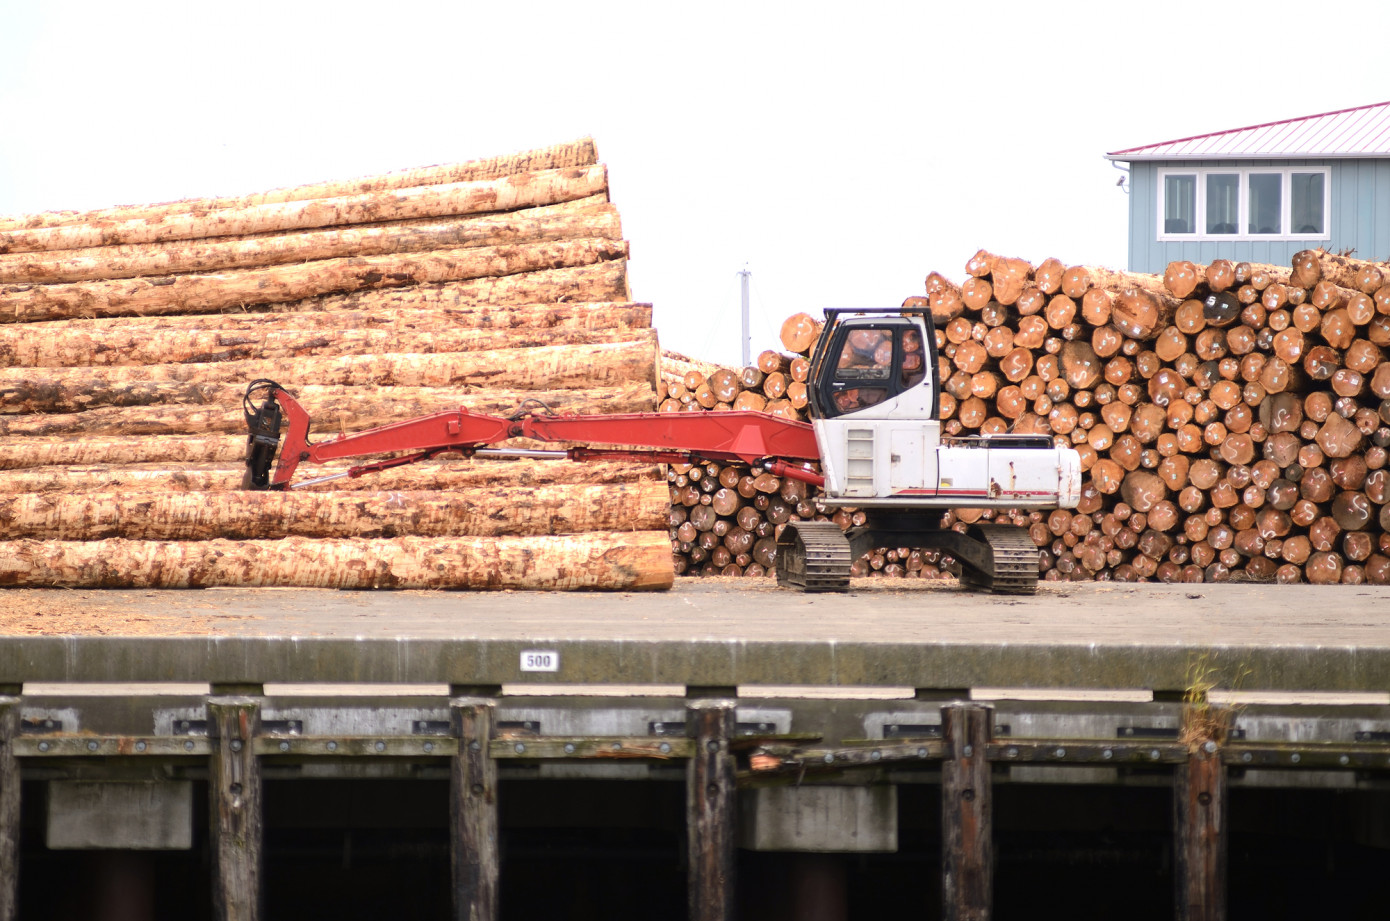 Exports of sawlog from Germany to China fall 60% in March